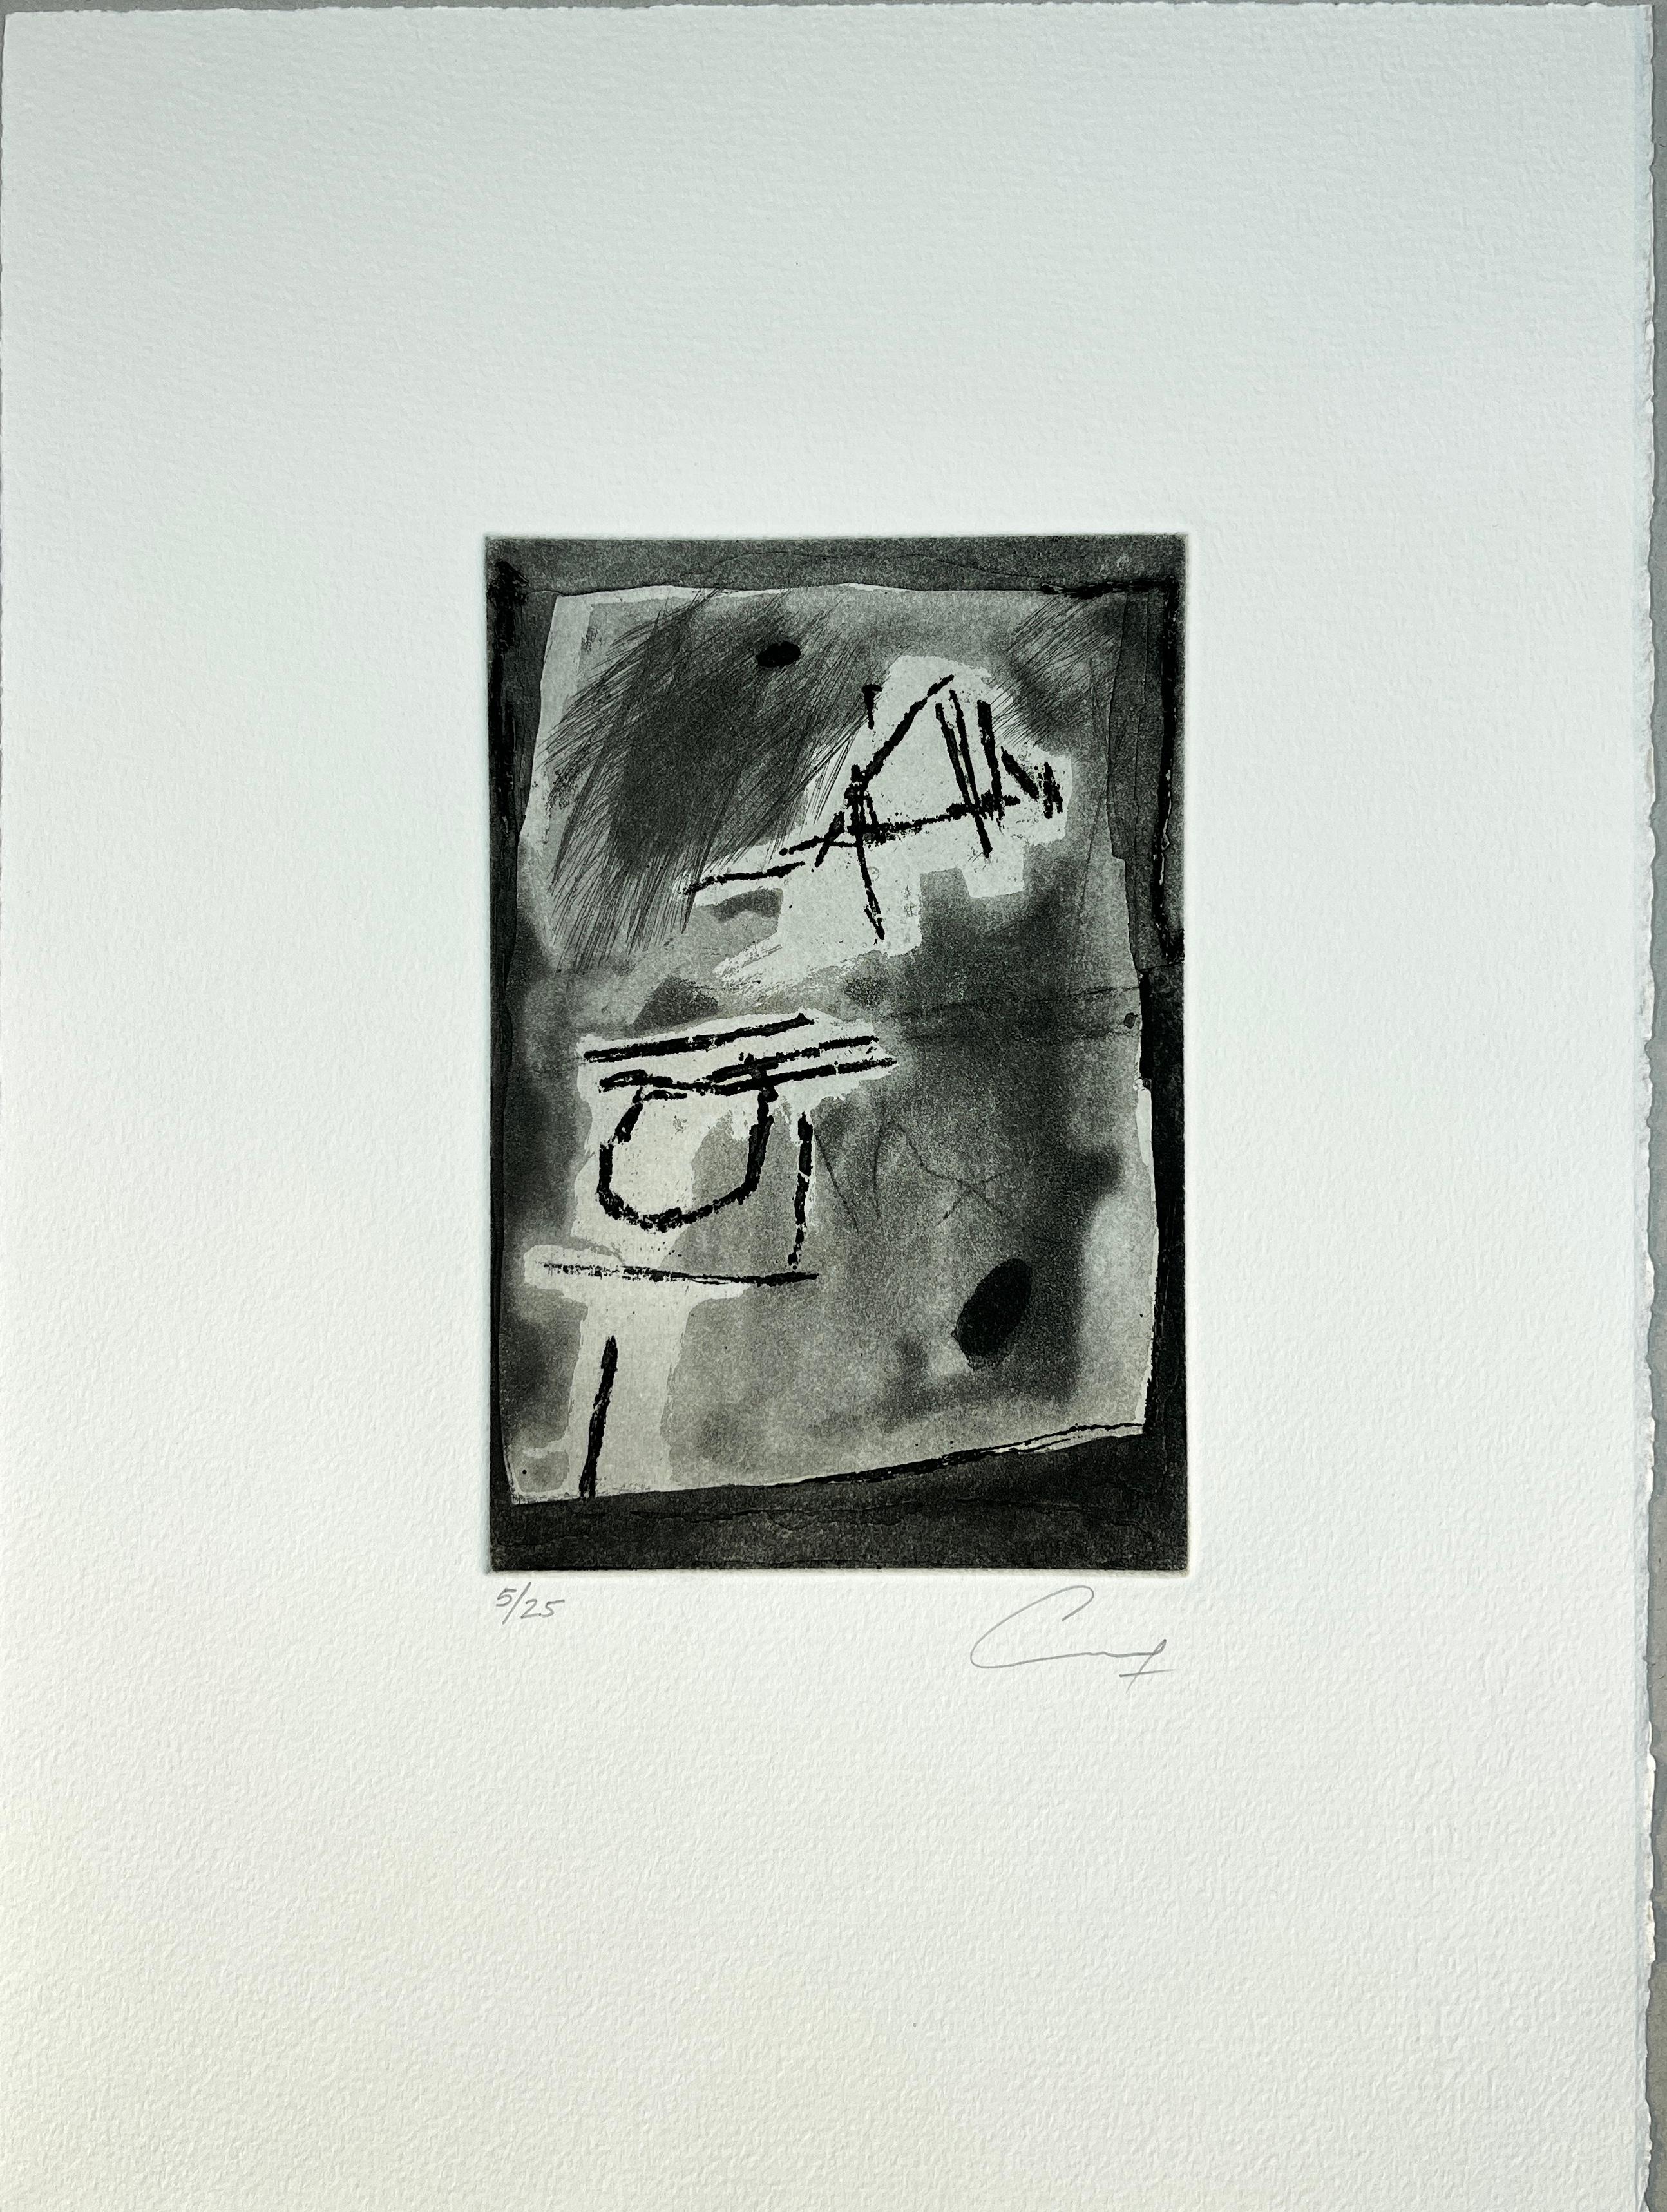 Carlos Gonzalez Abstract Print - Peruvian 1986 signed limited edition original art print etching 15x11 in.